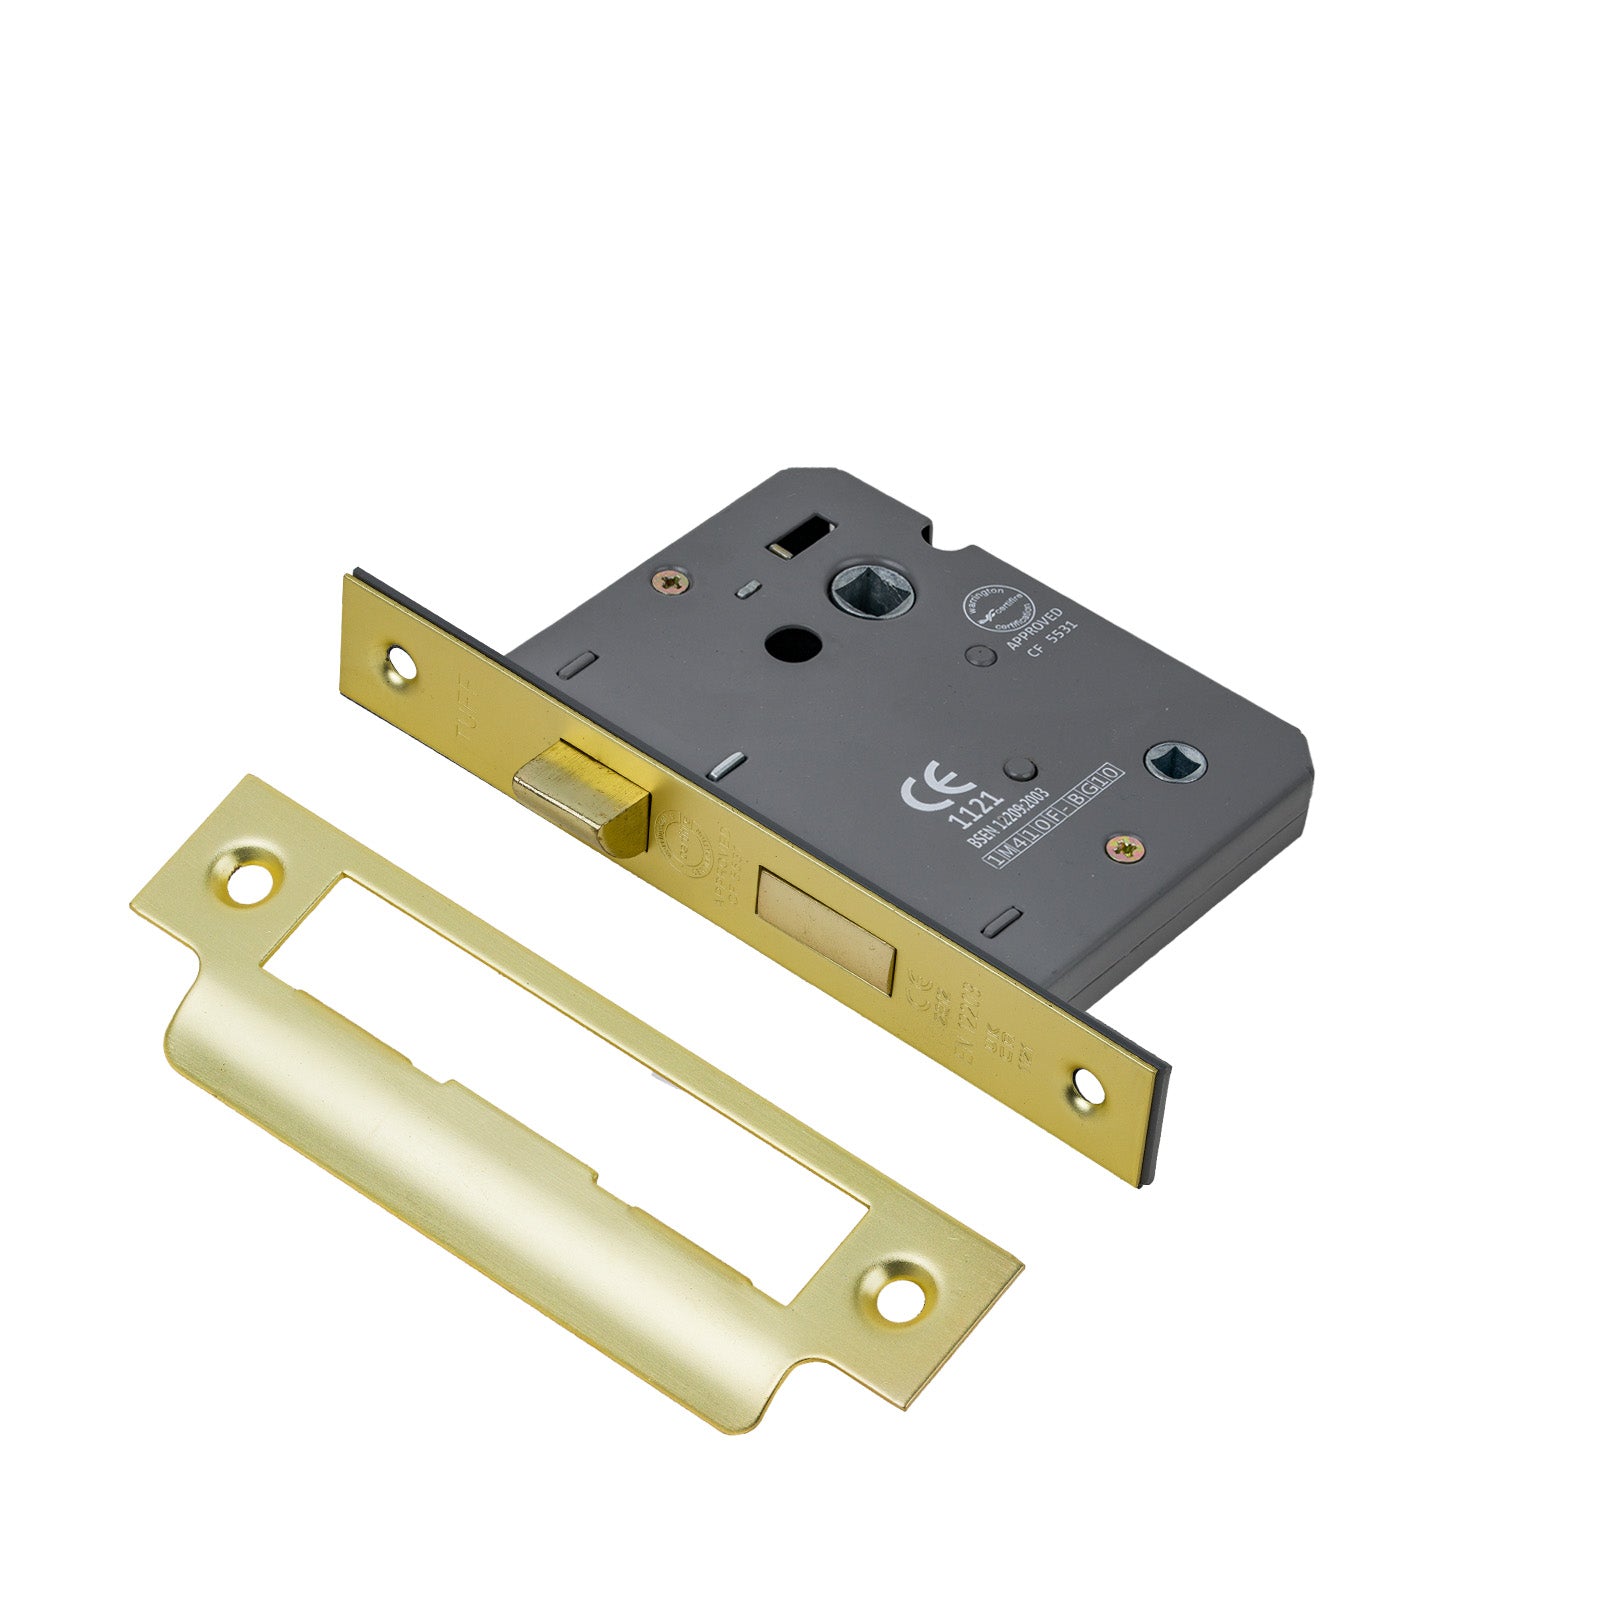 SHOW Bathroom Sash Lock - 3 Inch with Satin Brass finished forend and striker plate